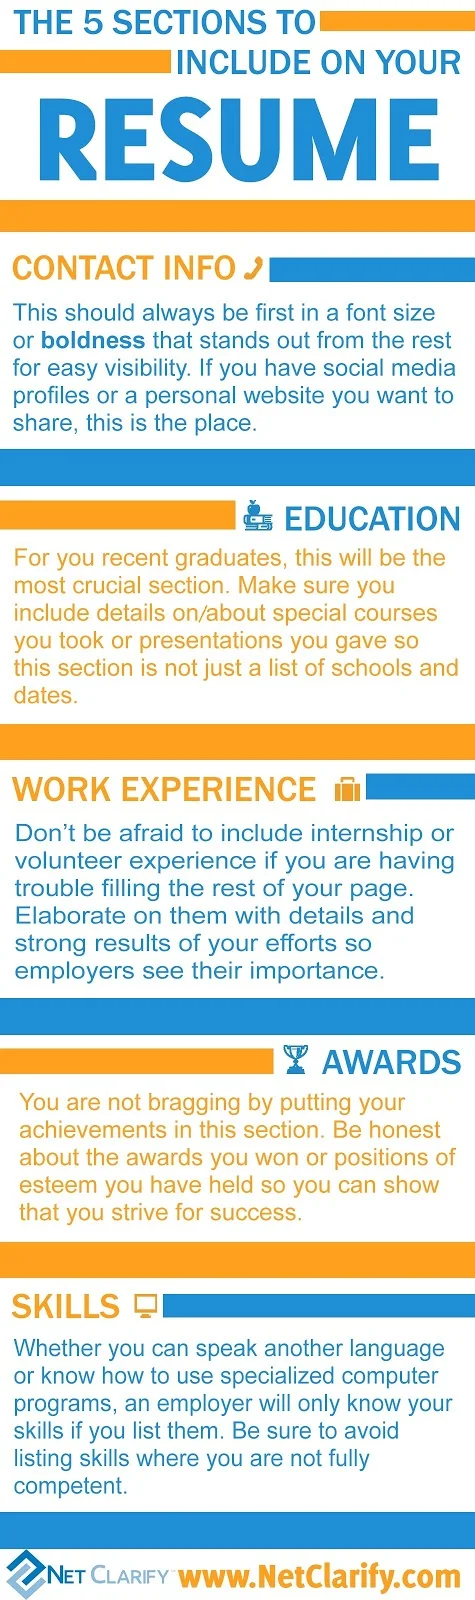 5 Sections To Remember When Writing Your Resume: infographic